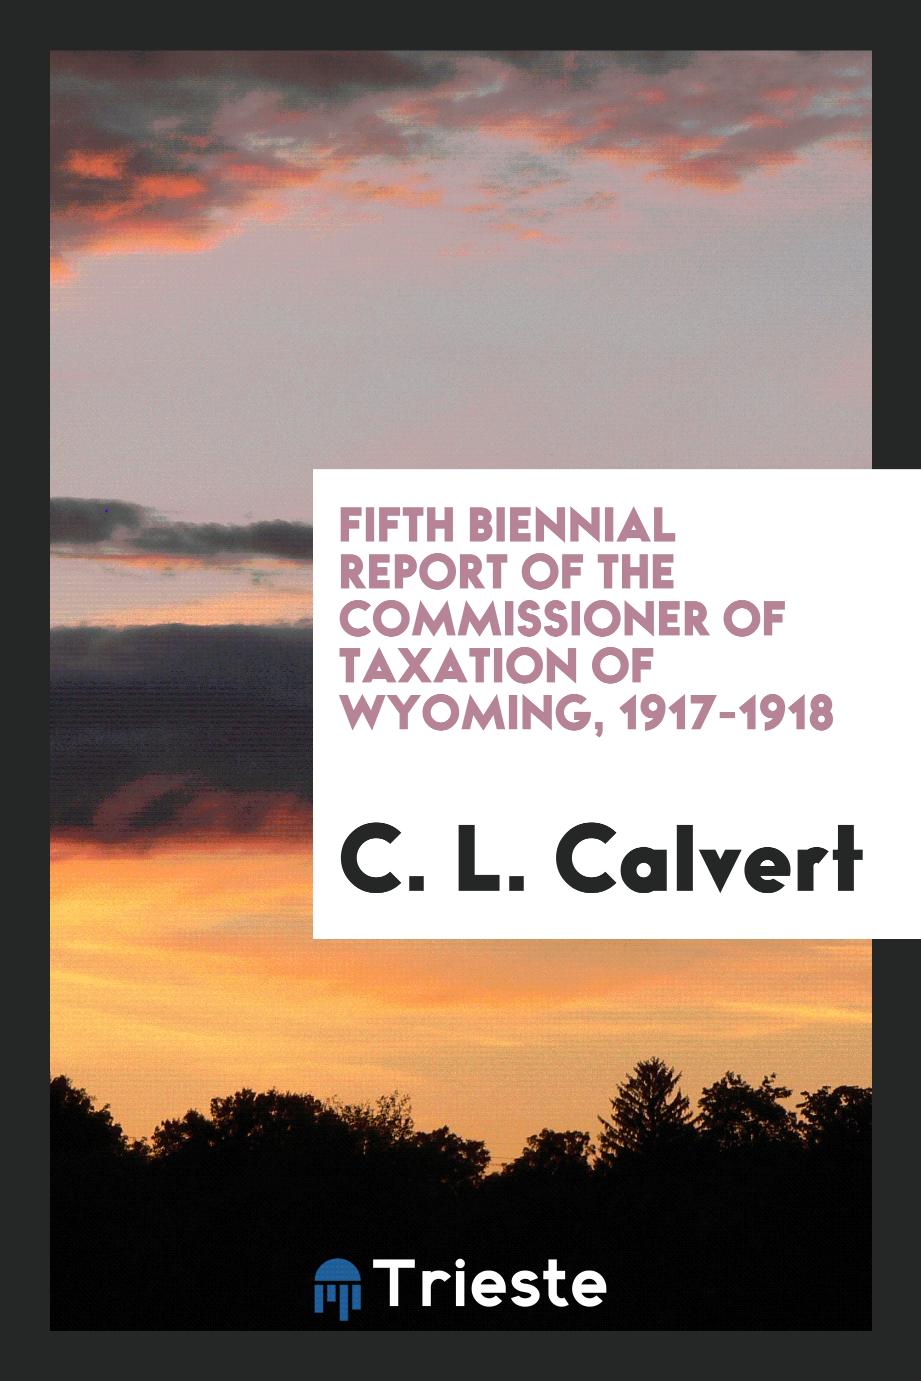 Fifth Biennial Report of the Commissioner of Taxation of Wyoming, 1917-1918